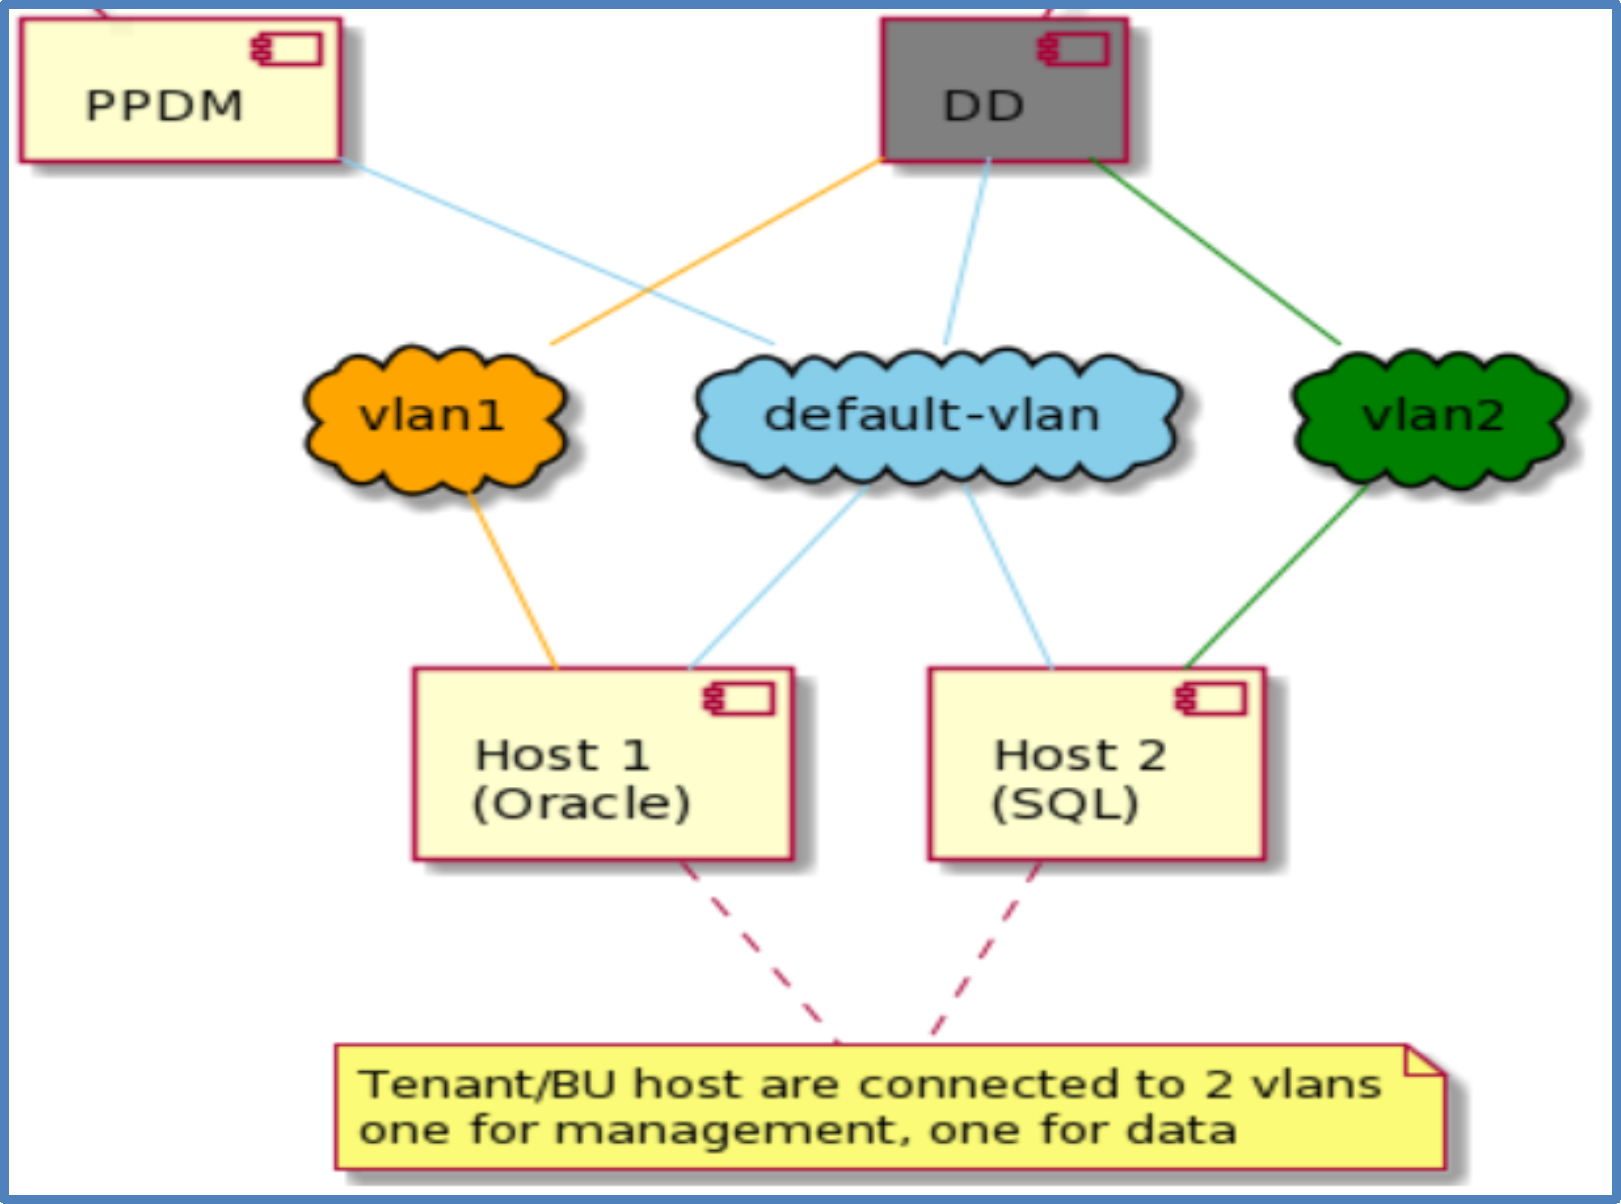 This figure shows the Multi-VLAN environment.